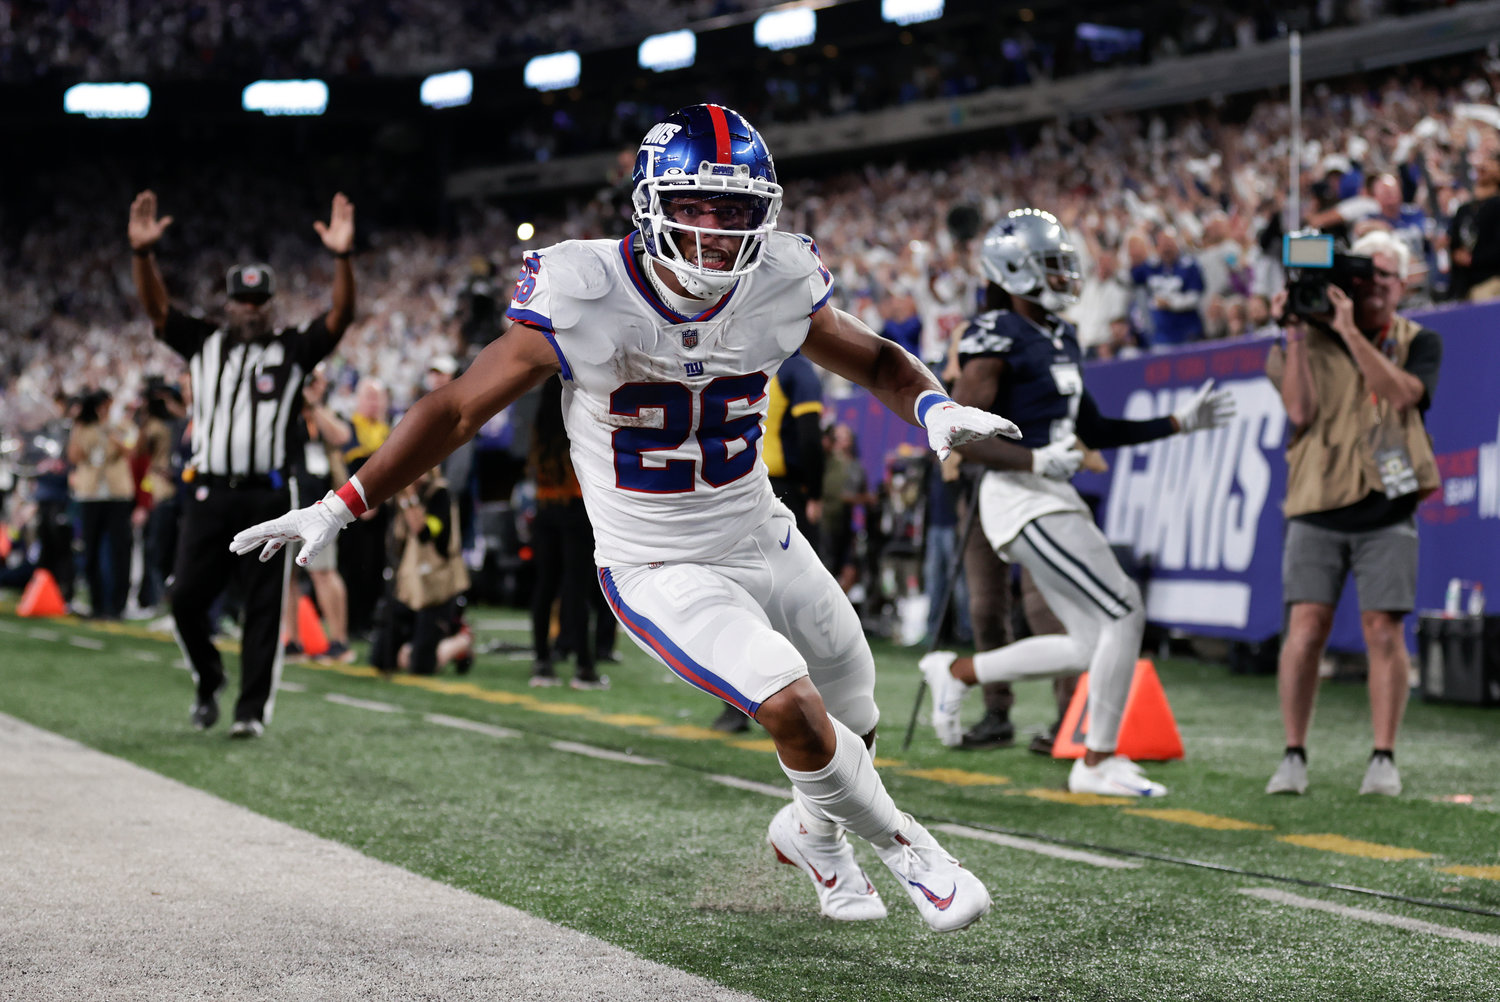 New York Giants running back Saquon Barkley reacts after scoring a touchdown against the Dallas Cowboys during on Monday night in East Rutherford, N.J.